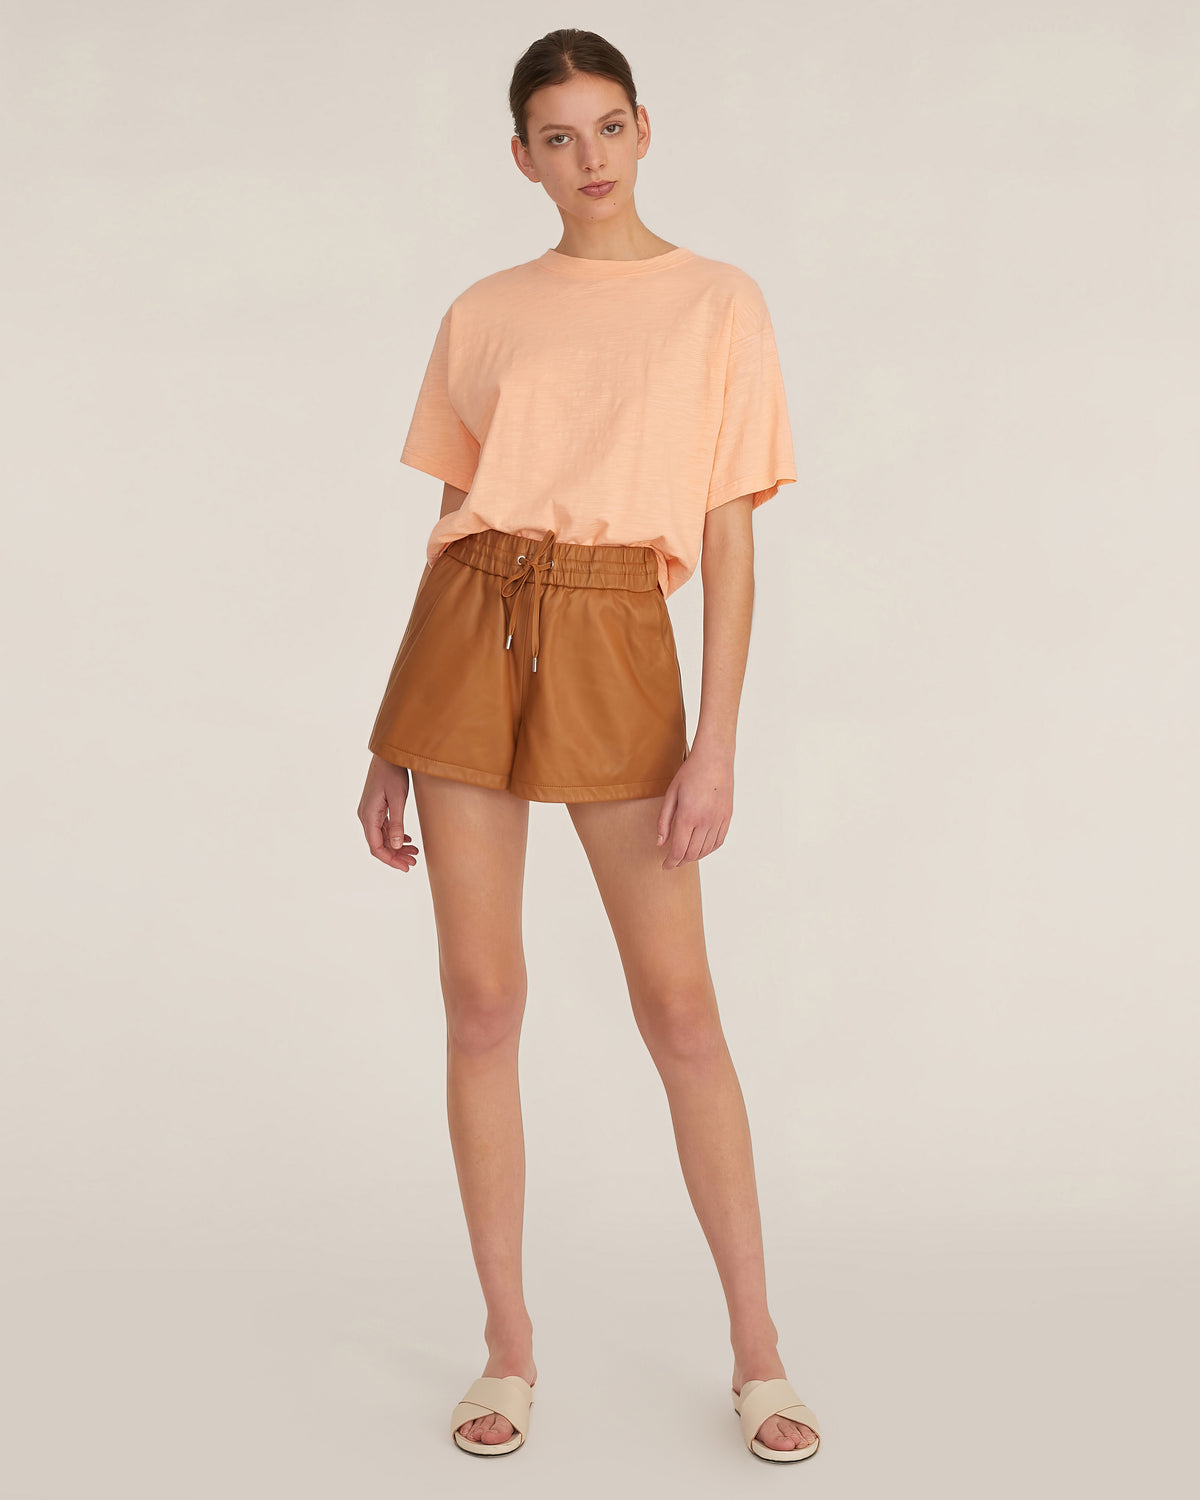 Baxter Leather Boxer Short in Almond